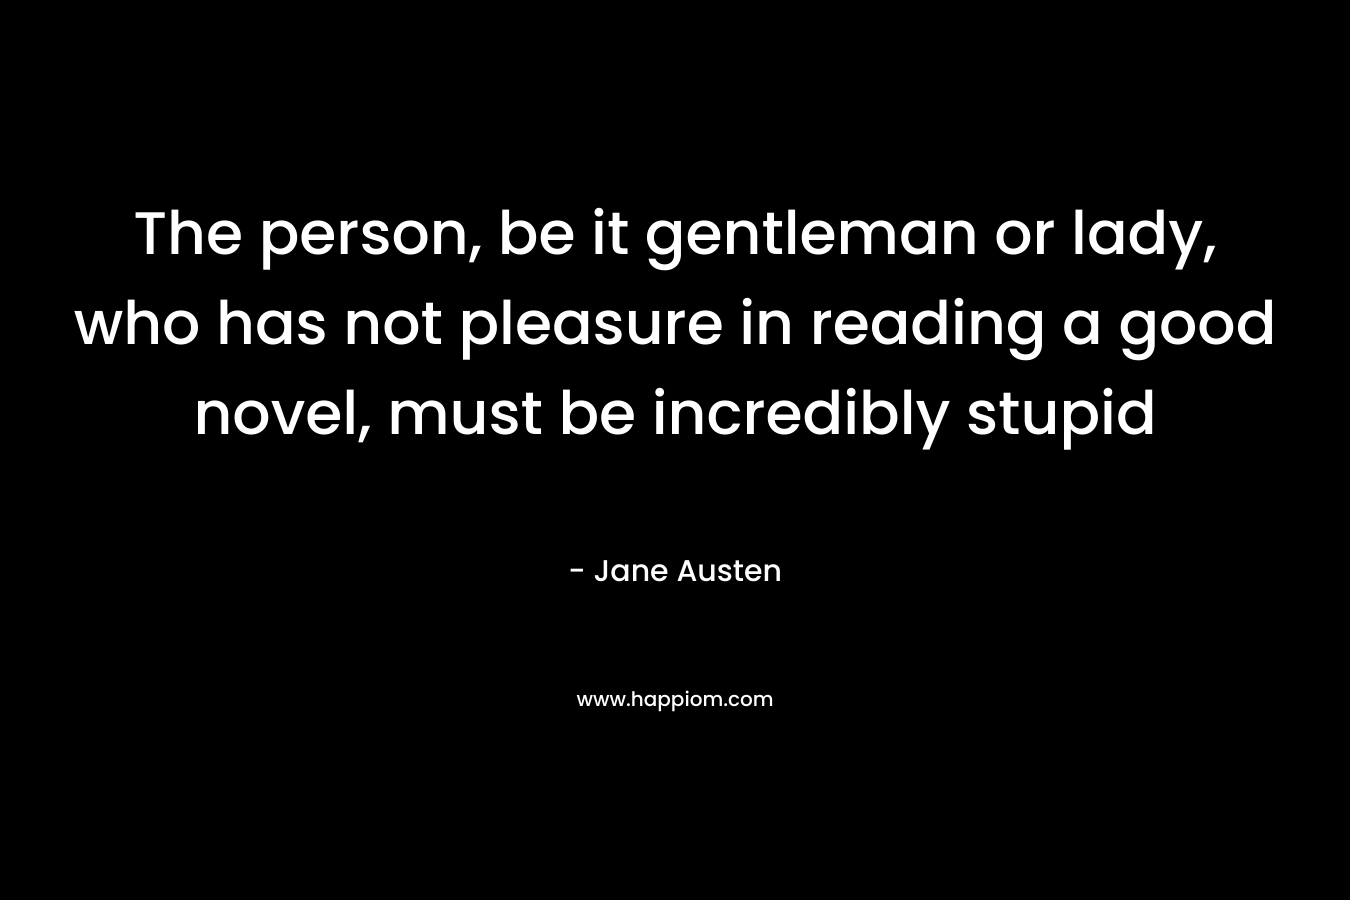 The person, be it gentleman or lady, who has not pleasure in reading a good novel, must be incredibly stupid